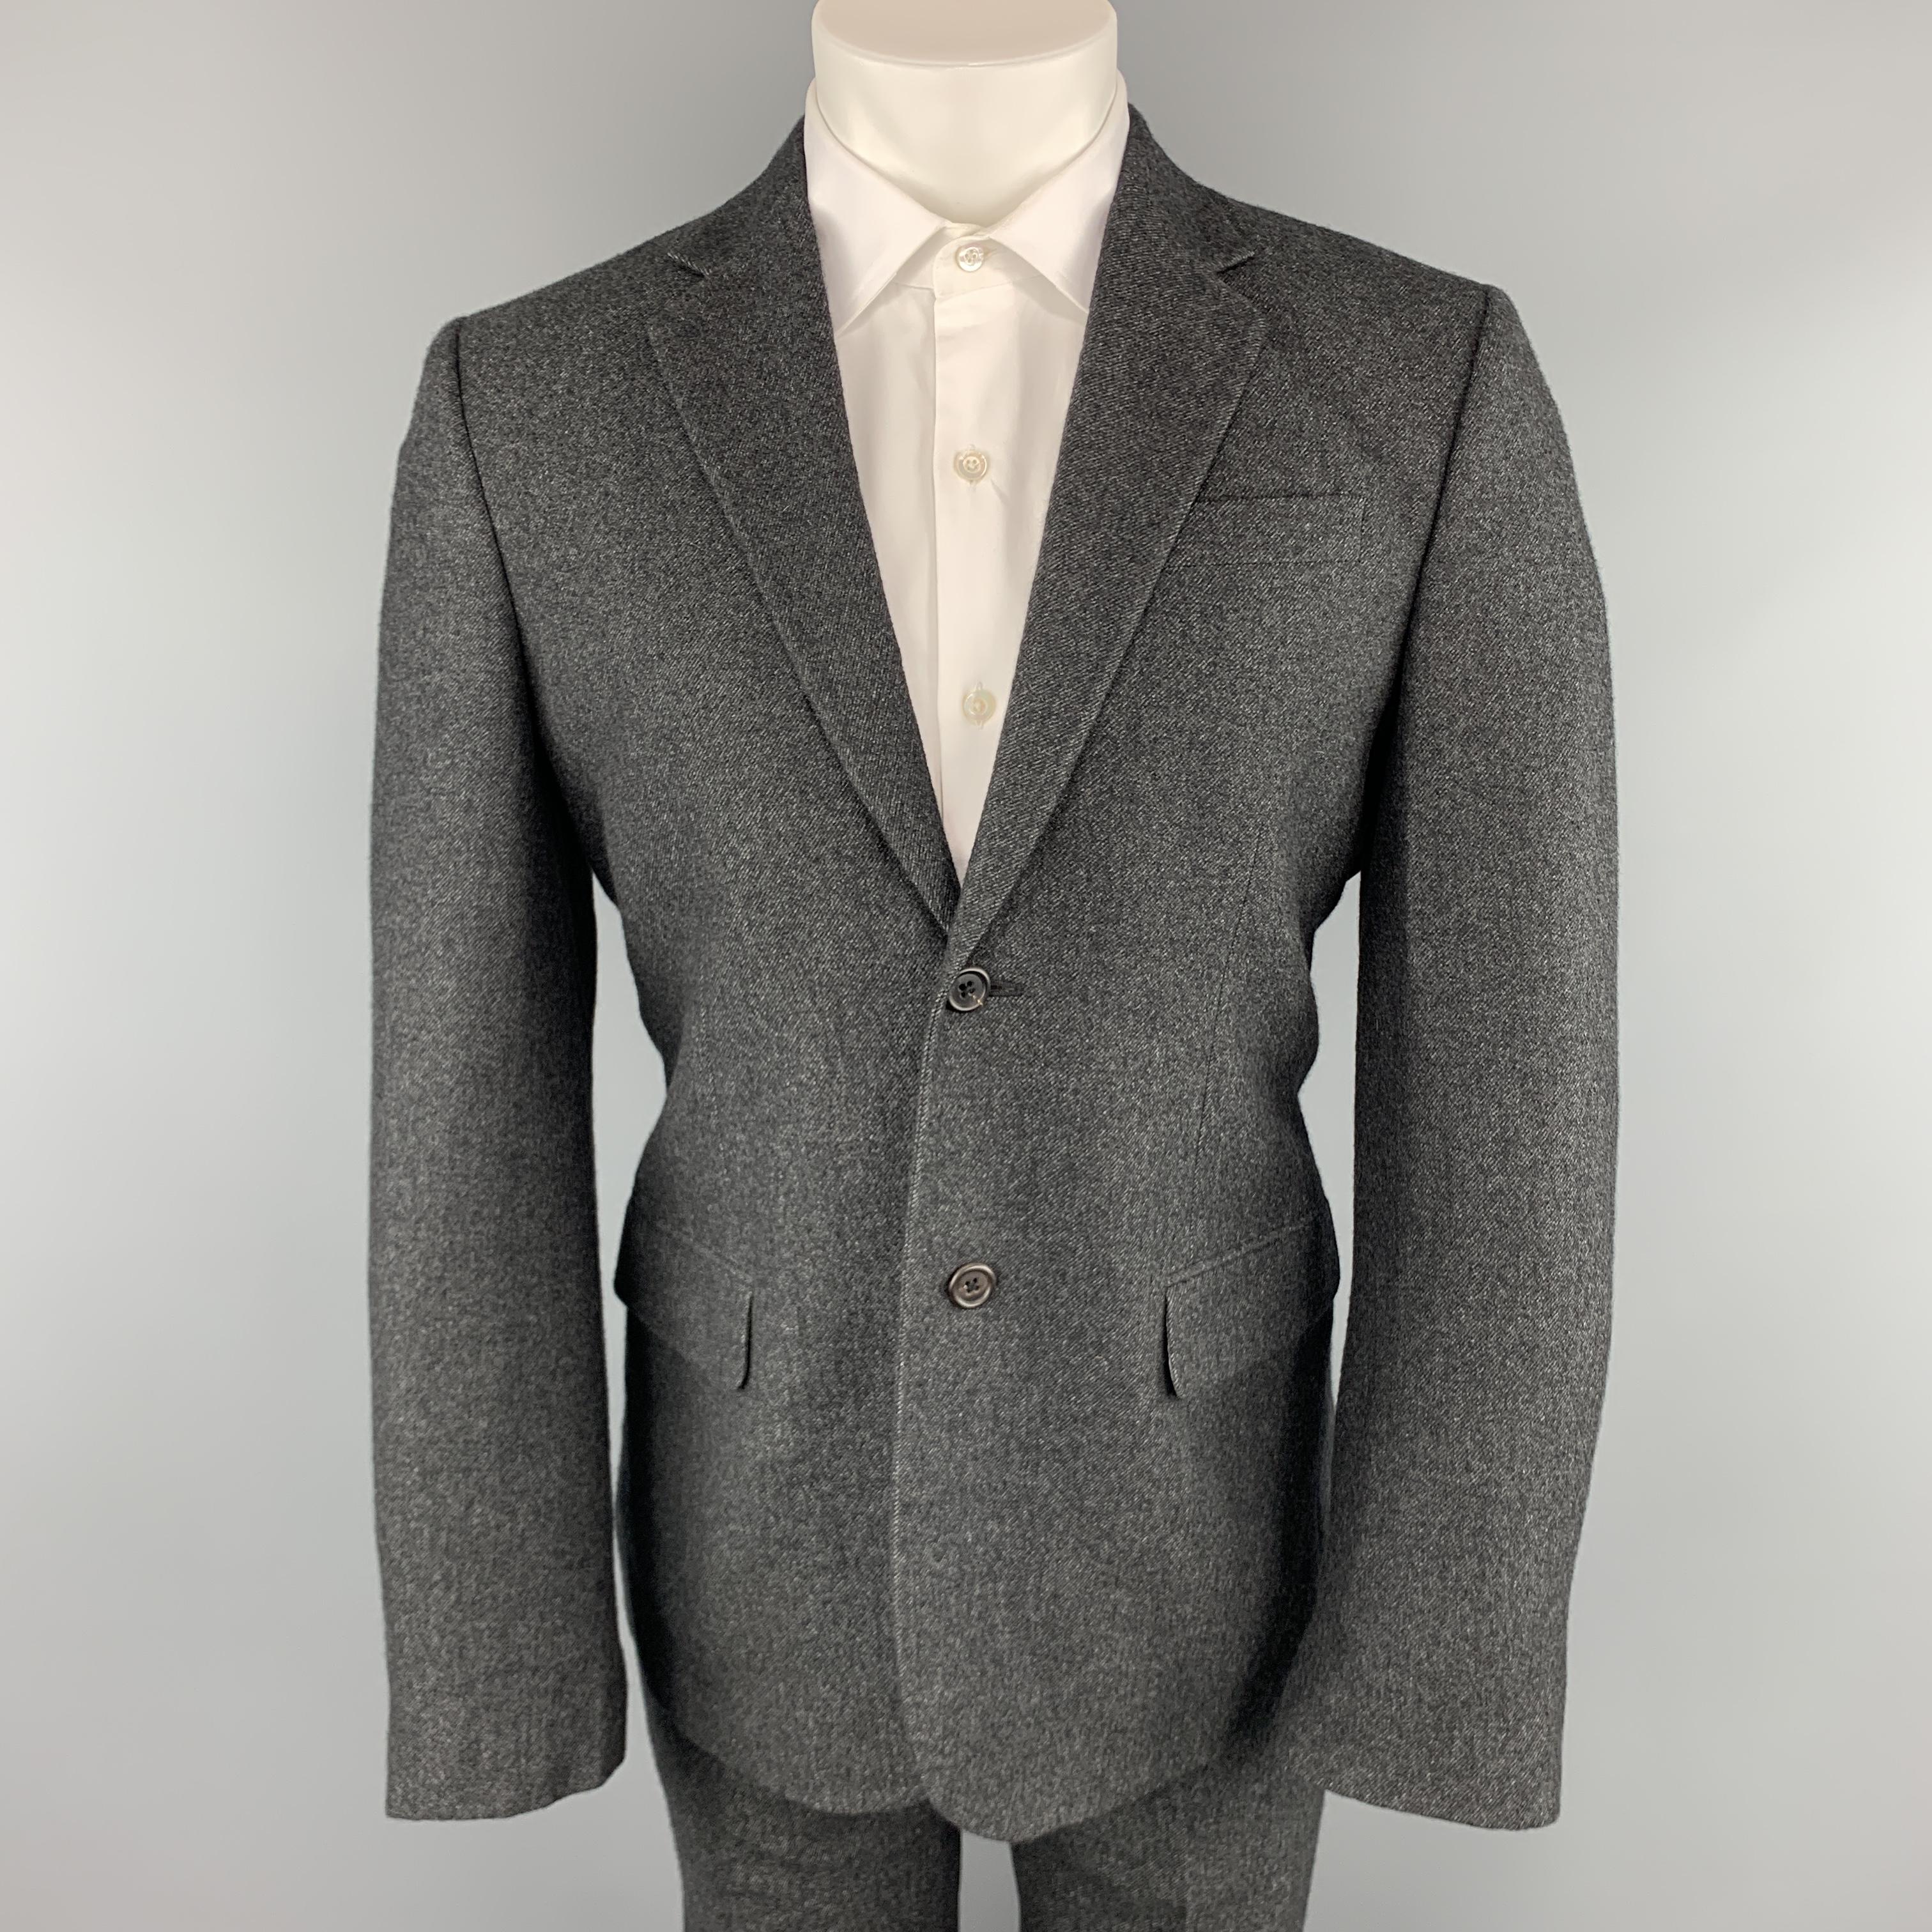 MARC JACOBS suit comes in charcoal textured cashmere and includes a  single breasted, two button sport coat with notch lapel and matching flat front wide leg trousers. Made in Italy.

Excellent Pre-Owned Condition.
Marked: IT